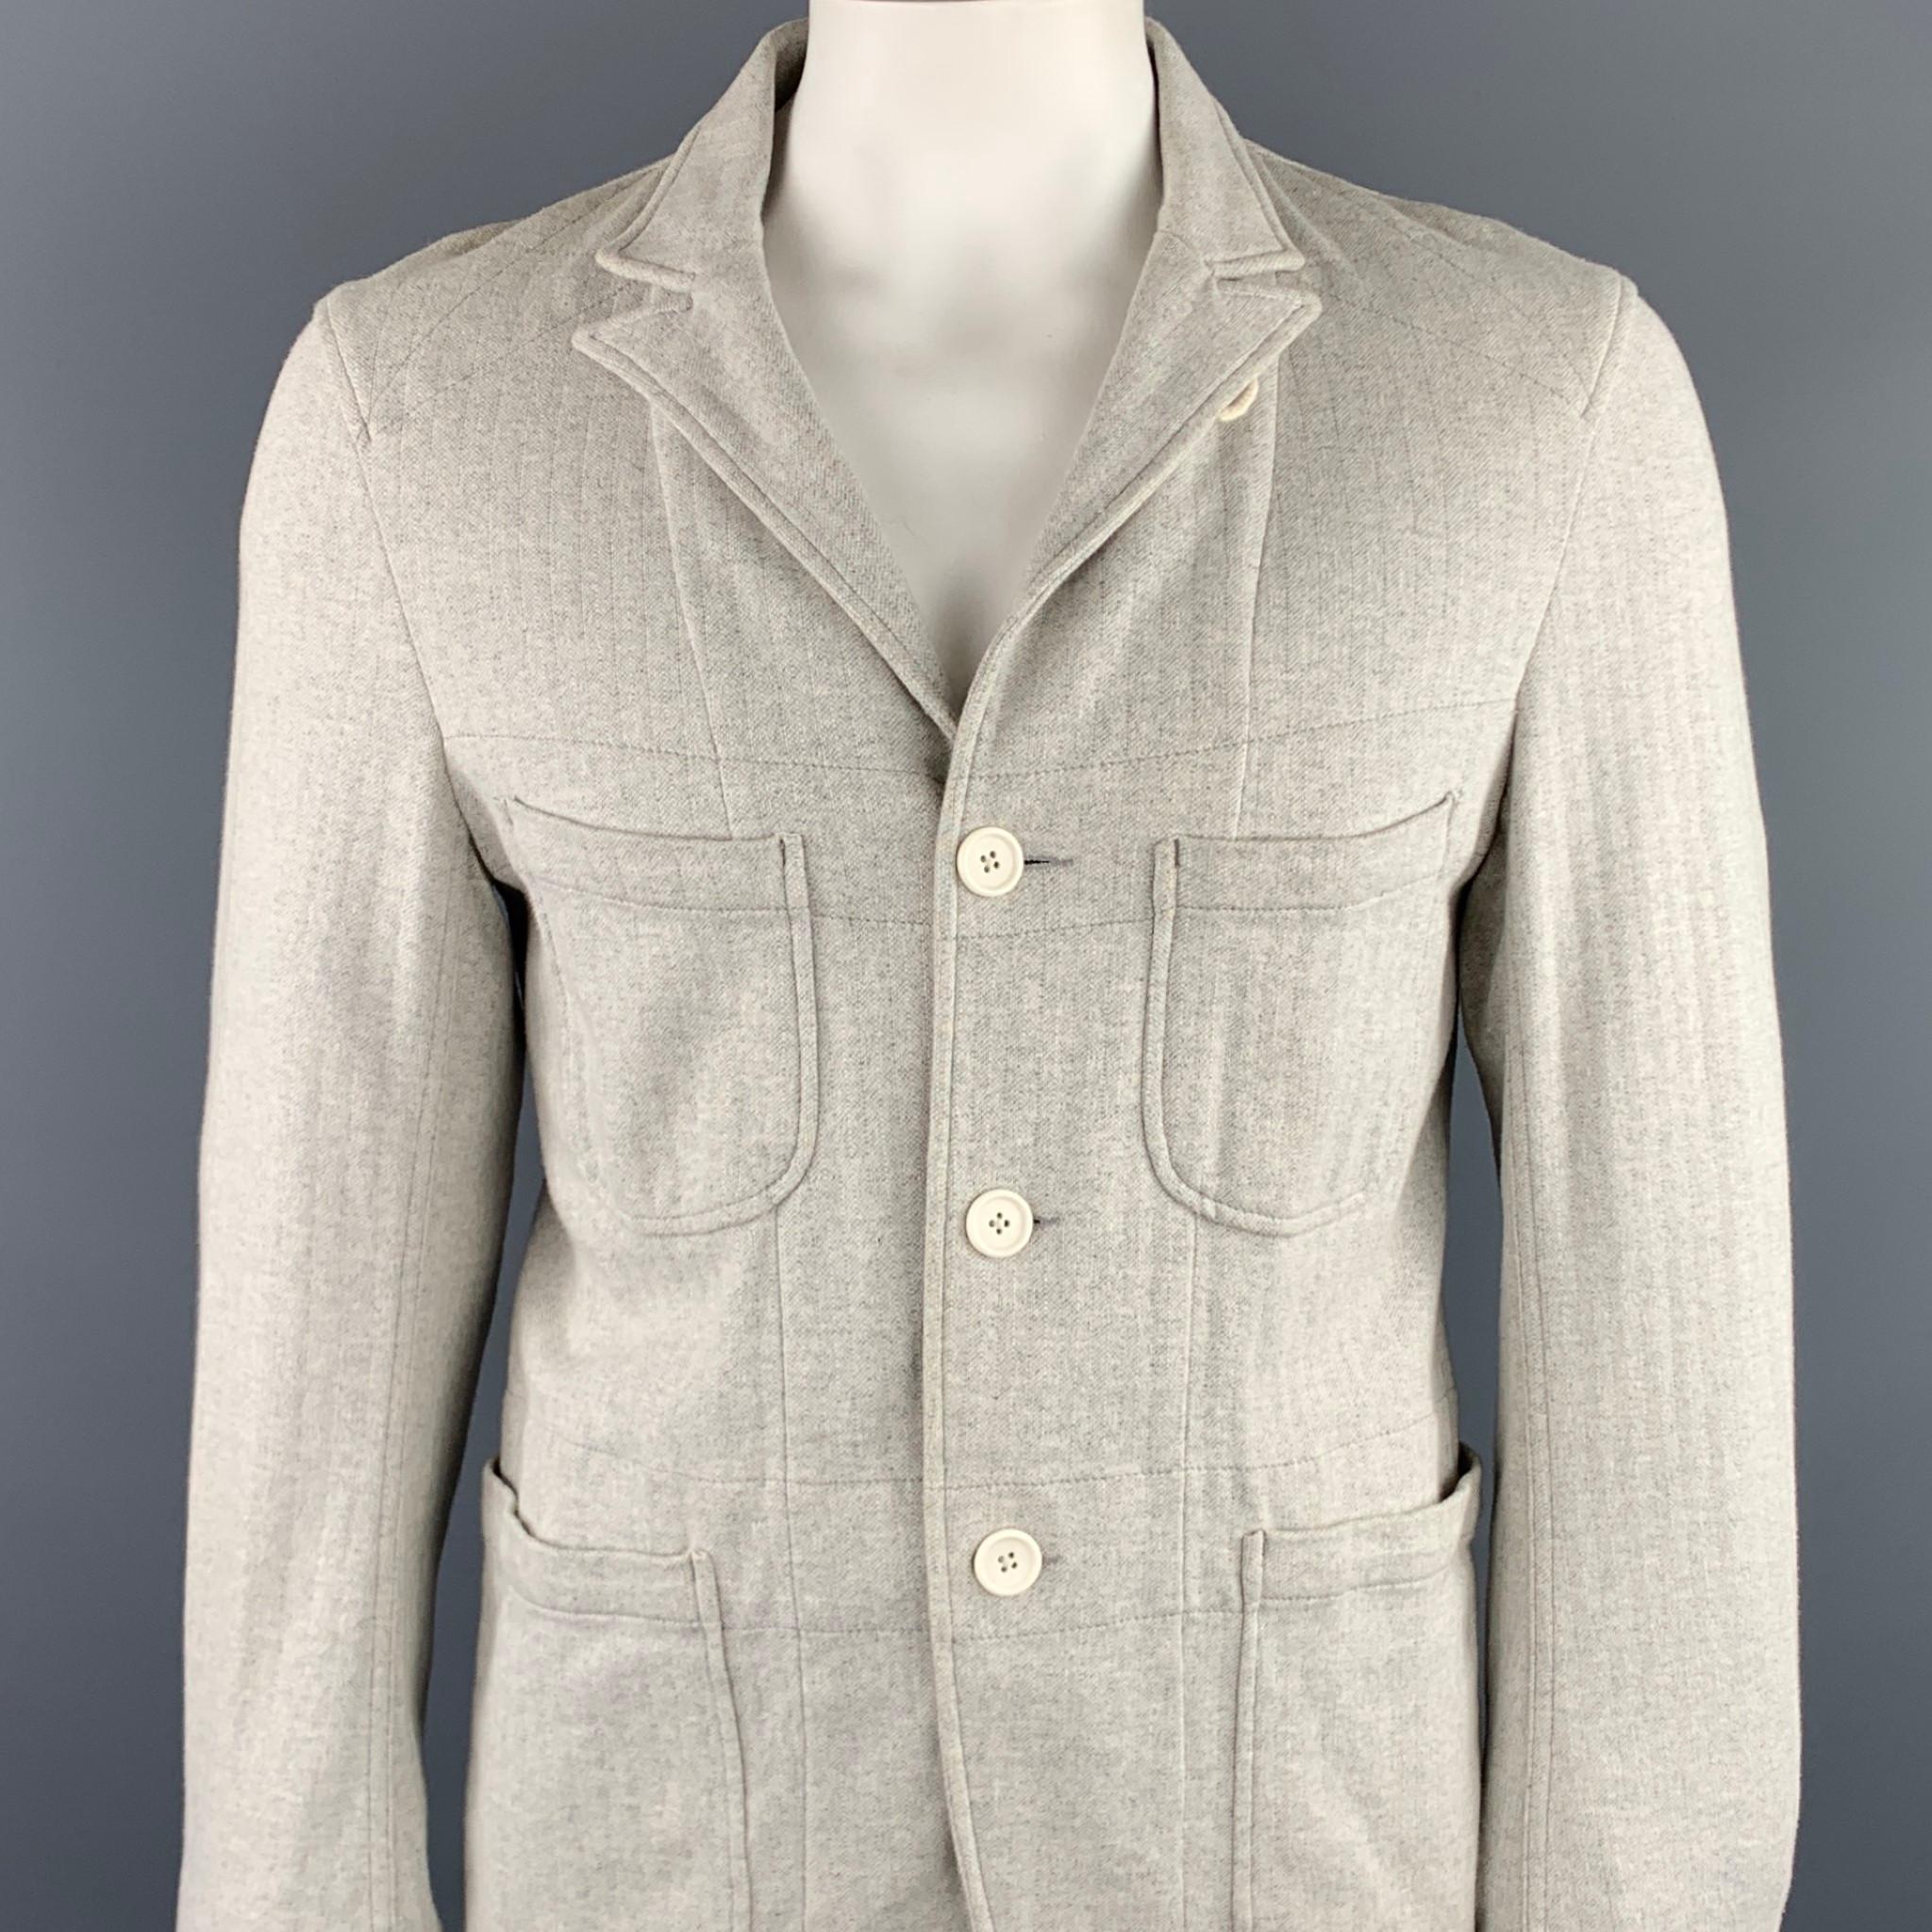 ENGINEERED GARMENTS jacket comes in a light gray heather cotton featuring a peak lapel style, contrast stitching, patch pockets, and a three button closure. As-Is. Made in USA.

Good Pre-Owned Condition.
Marked: US M

Measurements:

Shoulder: 18 in.